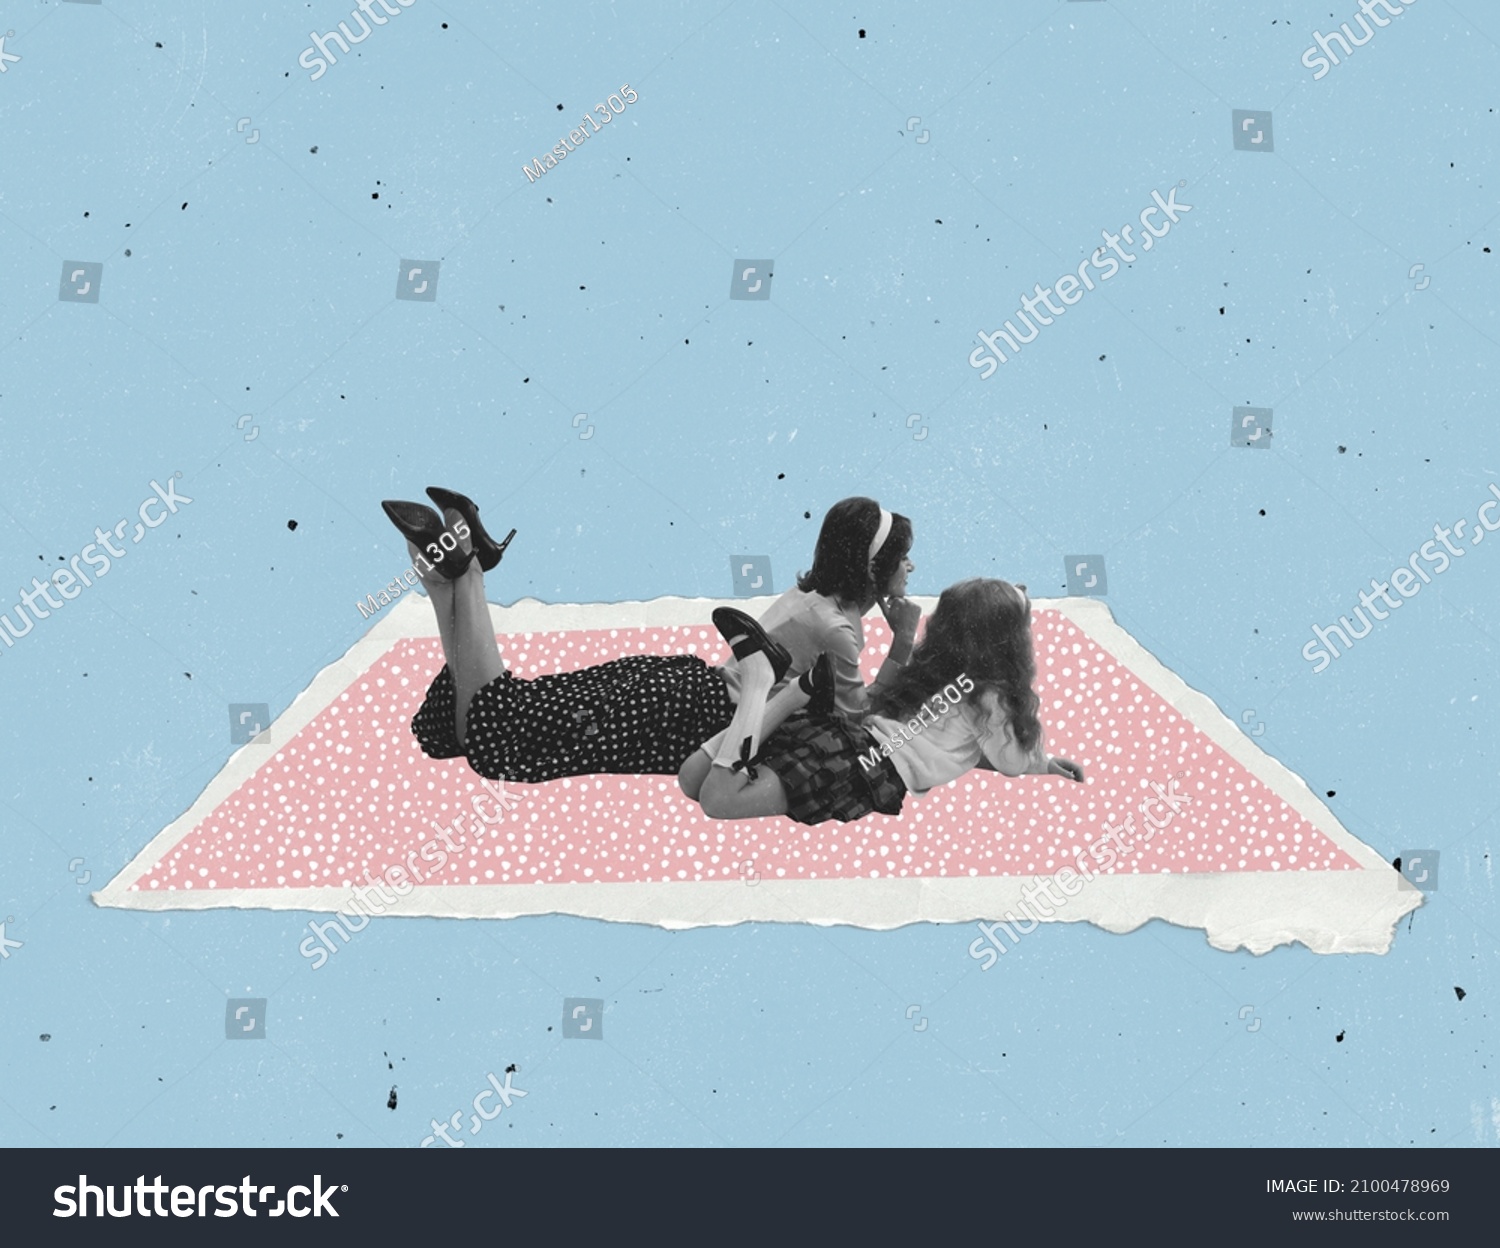 Contemporary art collage. Young woman and little girl lying on pink paper carpet isolated on blue background. Concept of vintage and retro design, creativity, imagination, inspiration, artwork and ad #2100478969